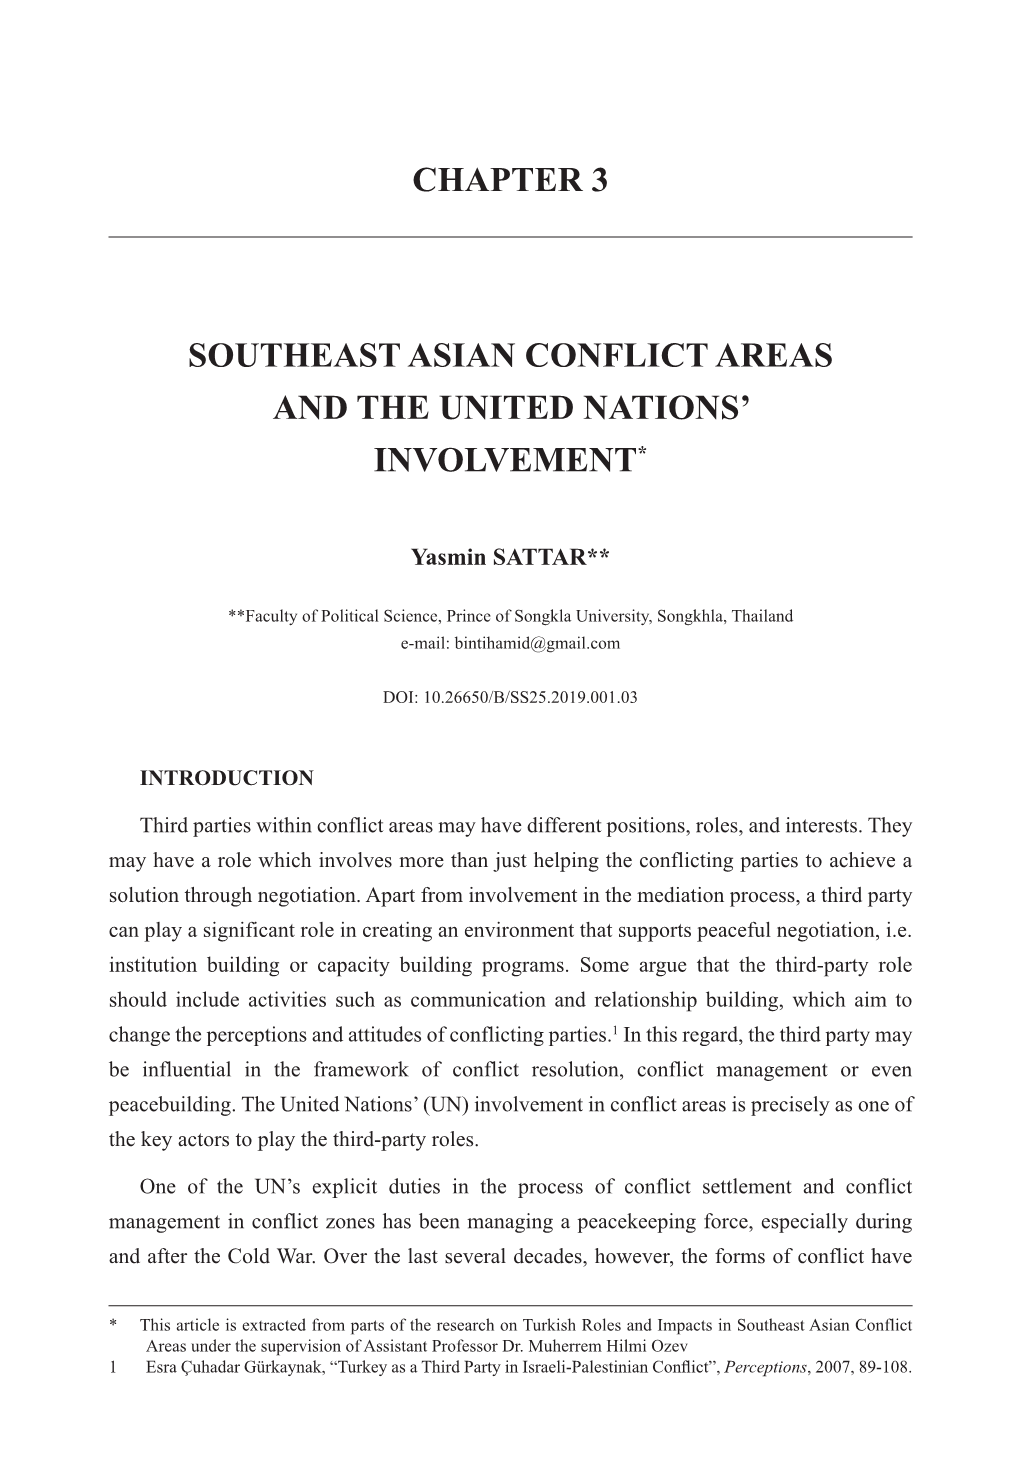 Chapter 3 Southeast Asian Conflict Areas and The